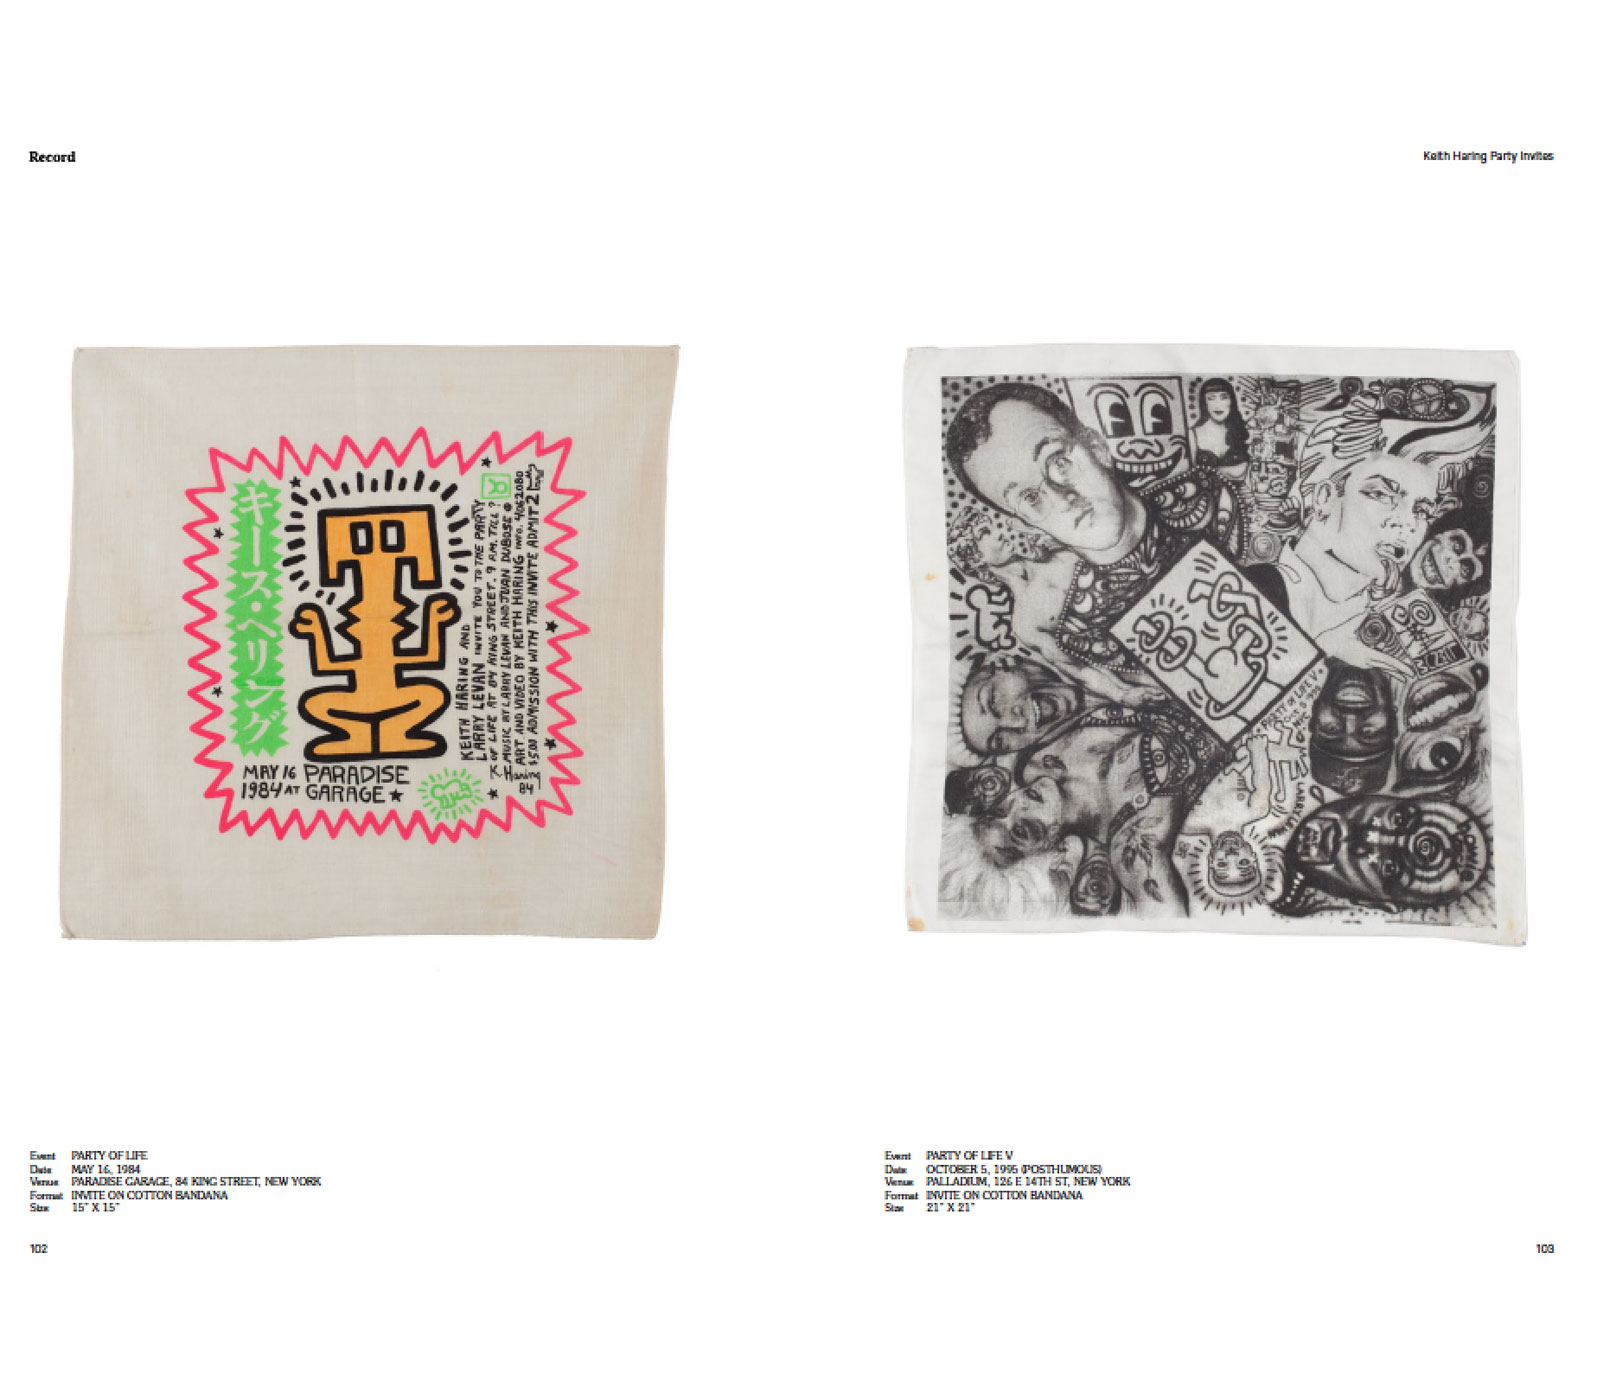 Record Culture Magazine Article featuring Keith Haring Party Invites from the Wild Life Archive